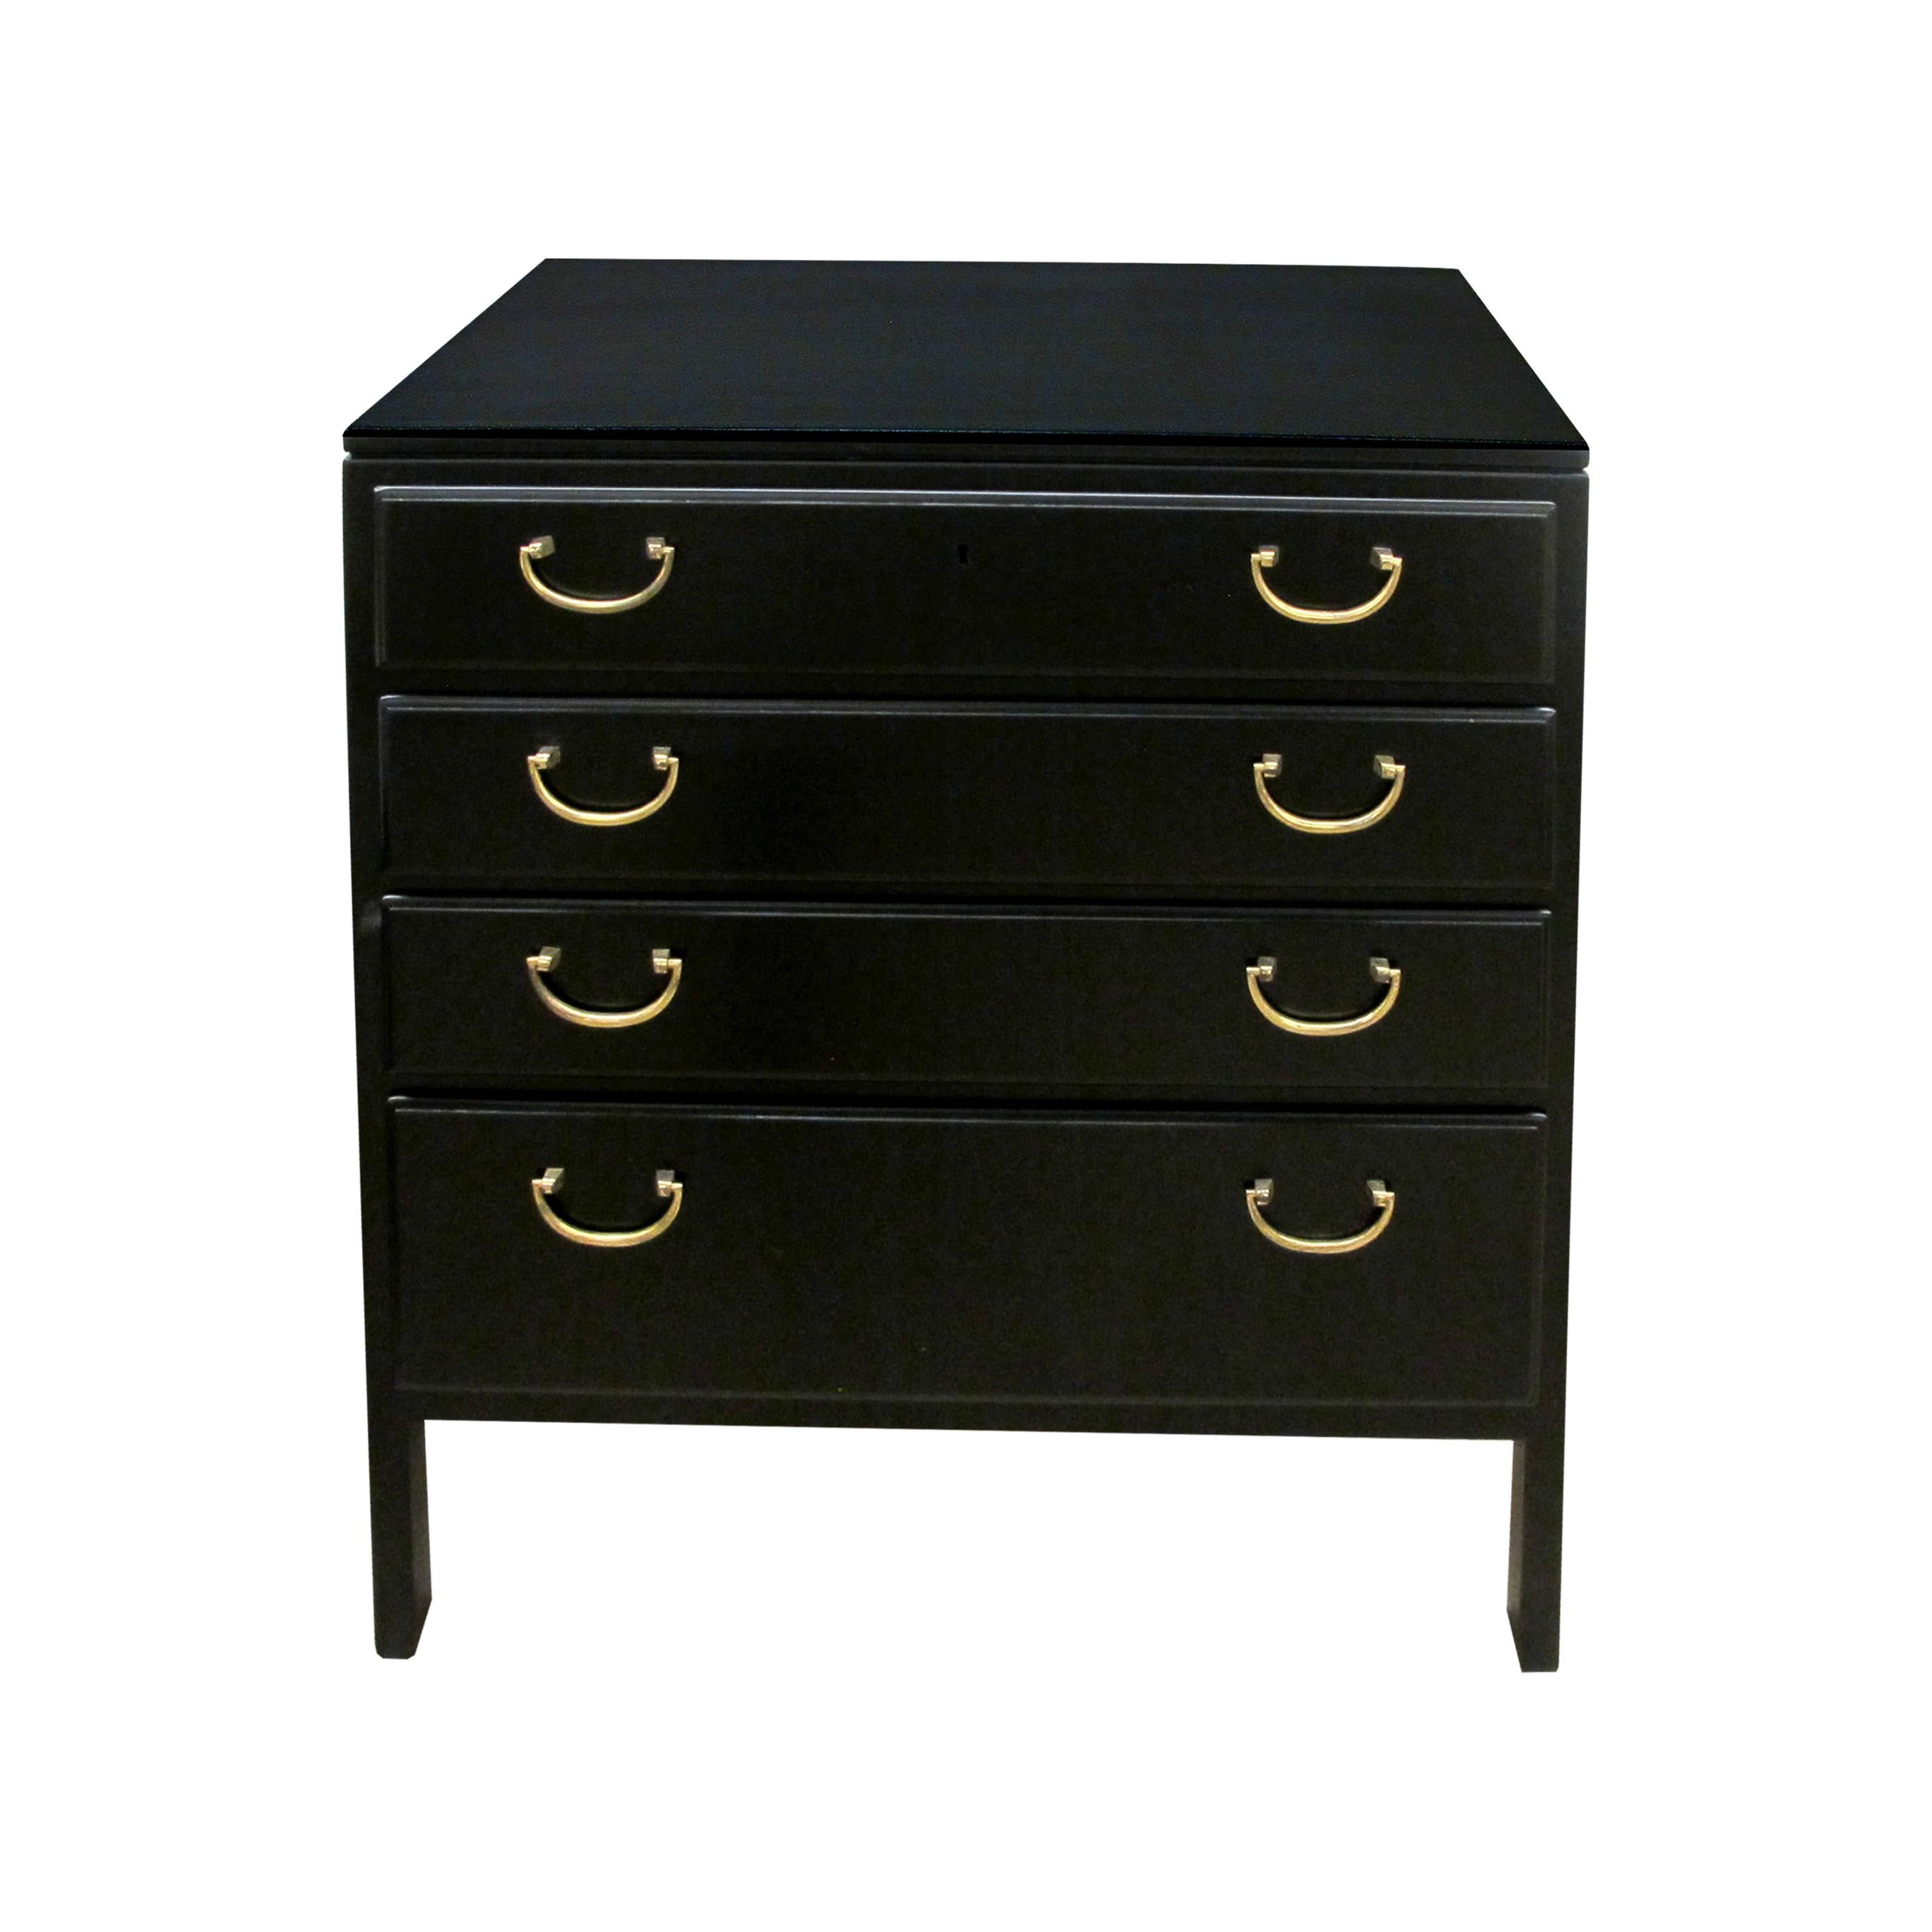 A pair of mid century ebonised chests of drawers designed by David Rosen for Bodafors Furniture. Each chest boasts 3 drawers of equal size and a larger drawer at the bottom which are all presented with their original brass handles. Their simple and